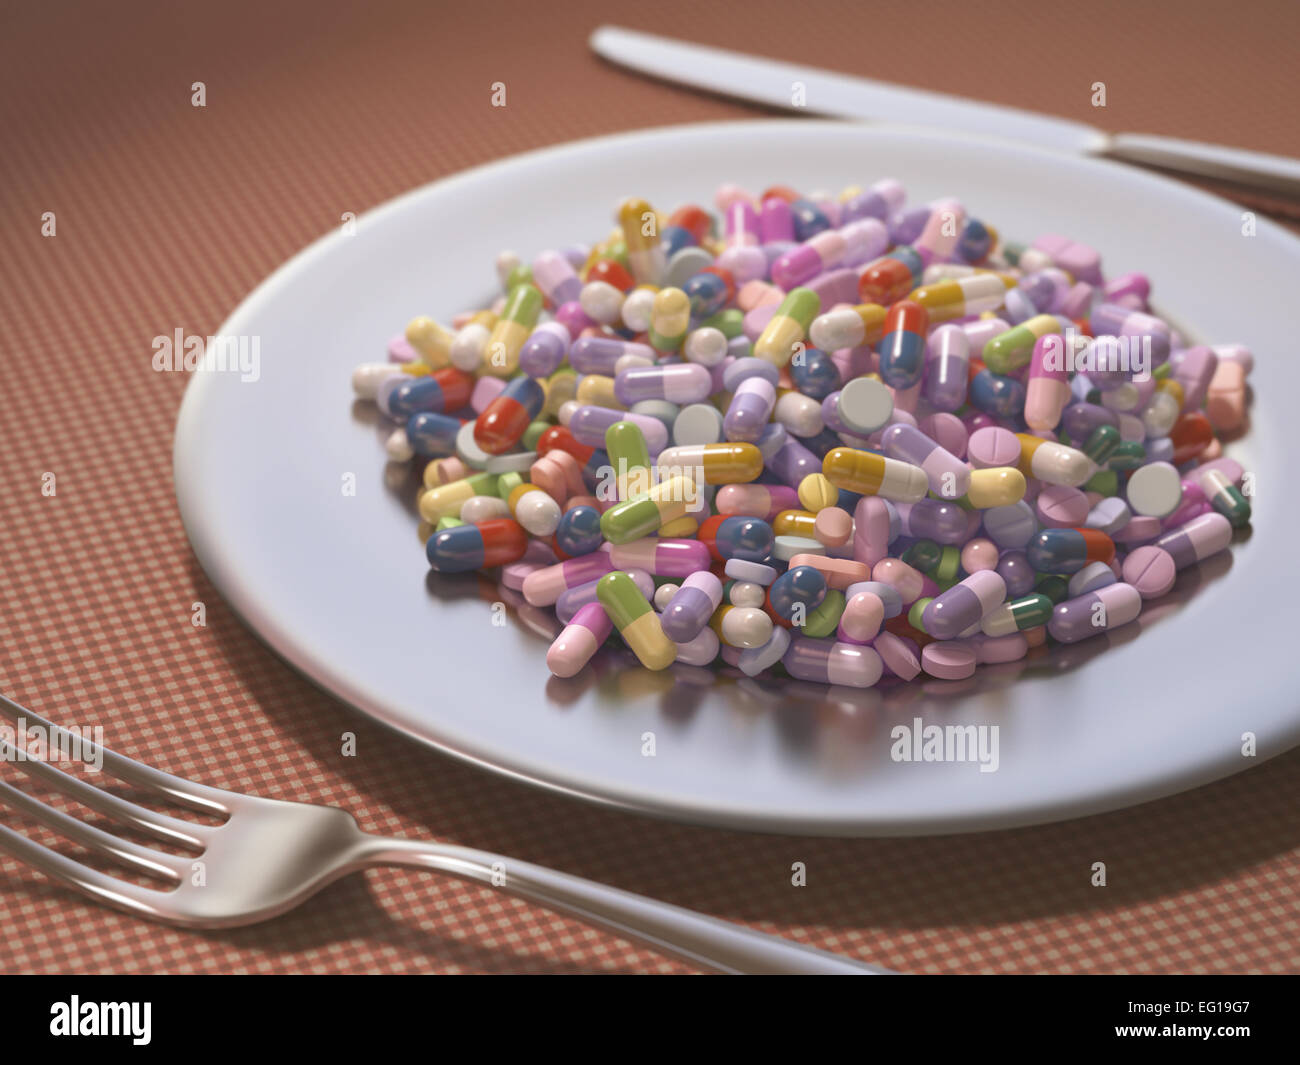 Dish full of medicines and supplements instead of food. Stock Photo